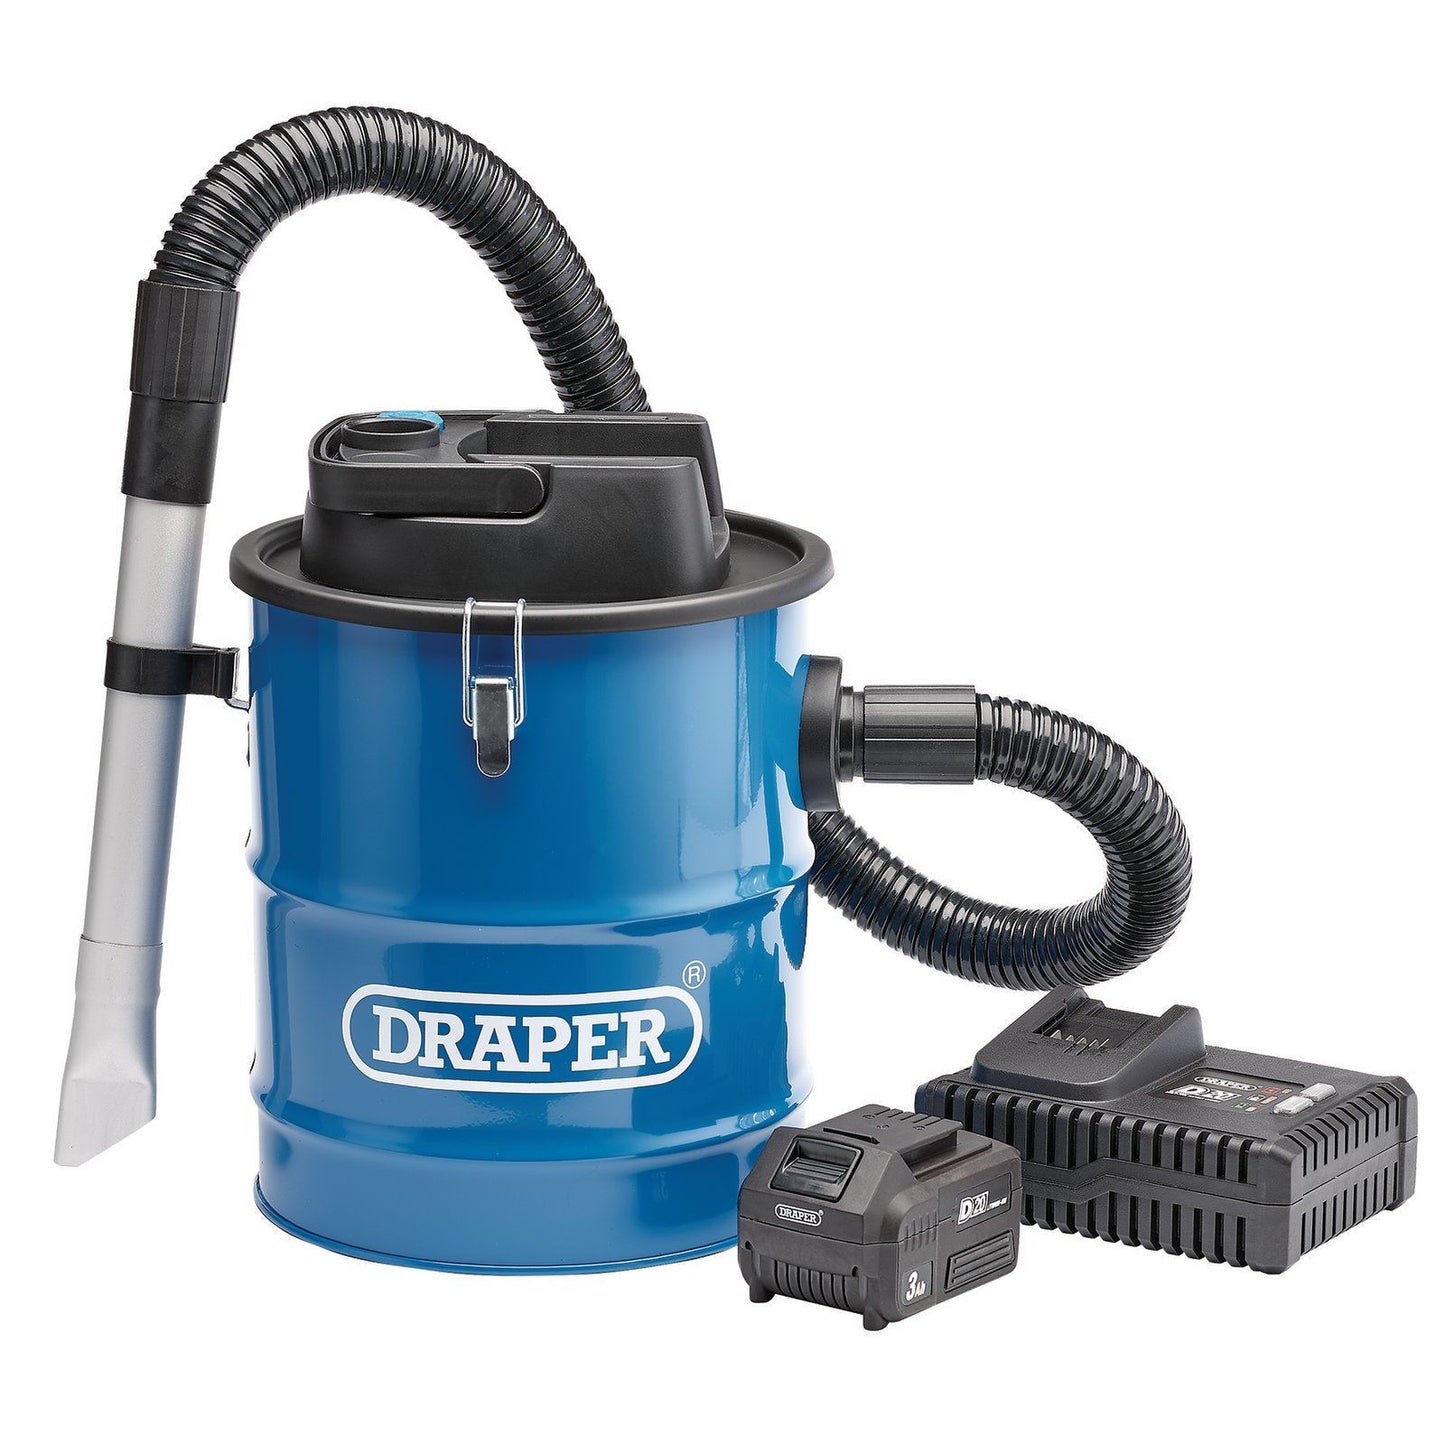 Draper D20 20V Ash Vacuum Cleaner with 1x 3.0Ah Battery and Fast Charger - 95170